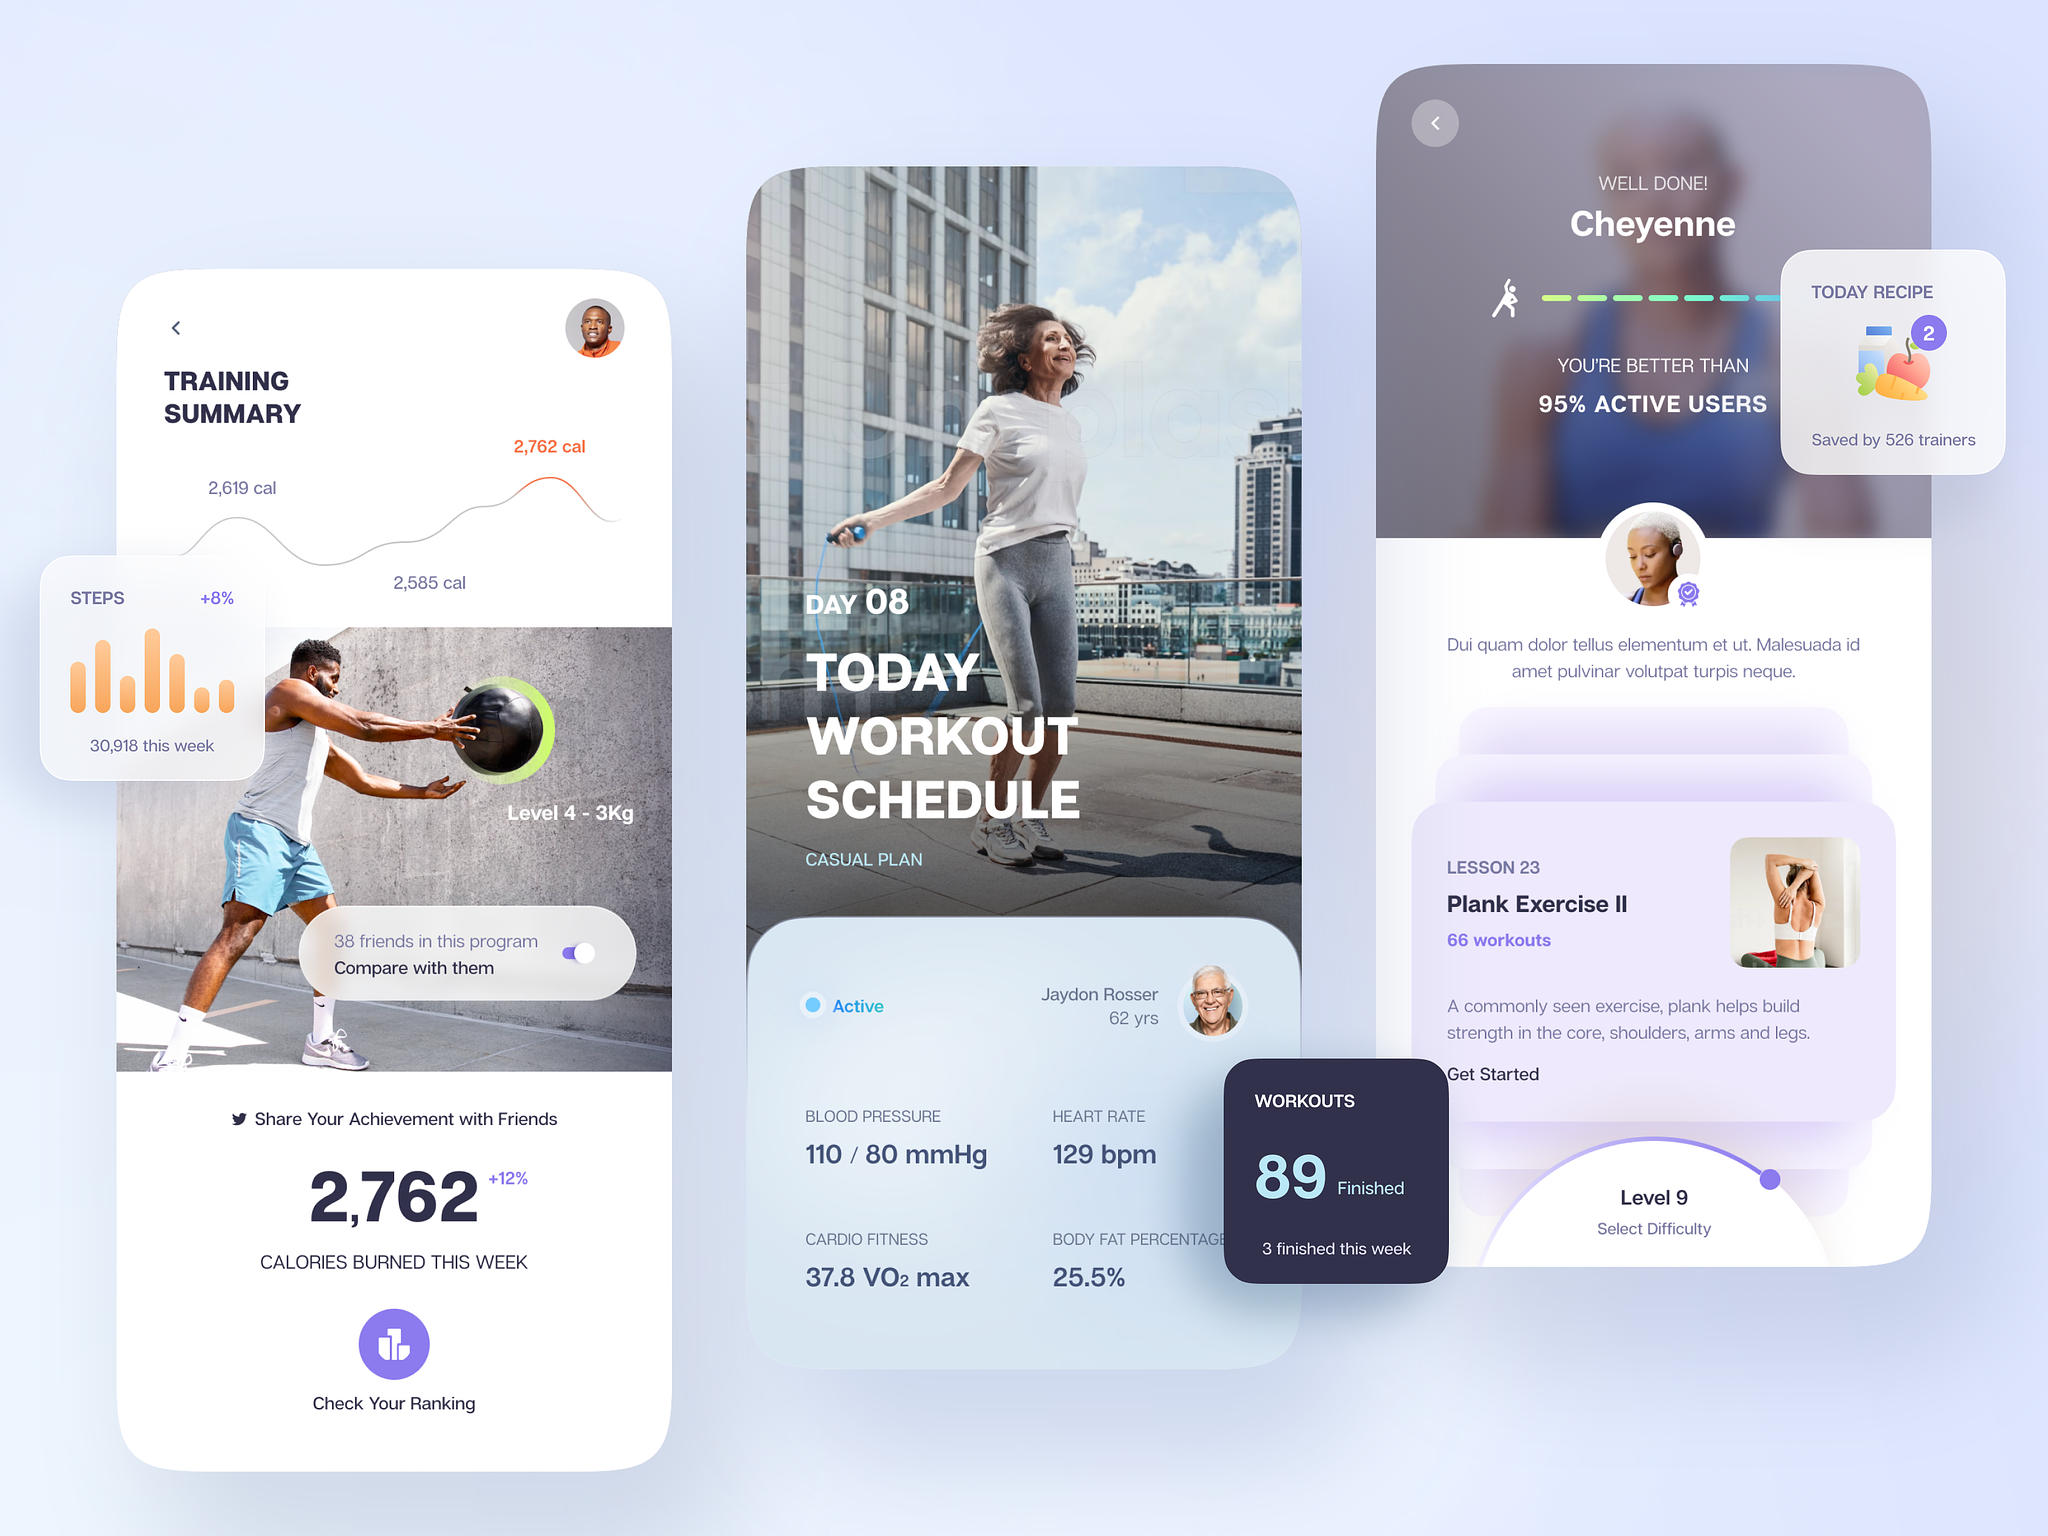 Building a successful fitness app is an ongoing process, and listening to user feedback and iterating based on their needs will be crucial to maintaining and growing your app's user base.